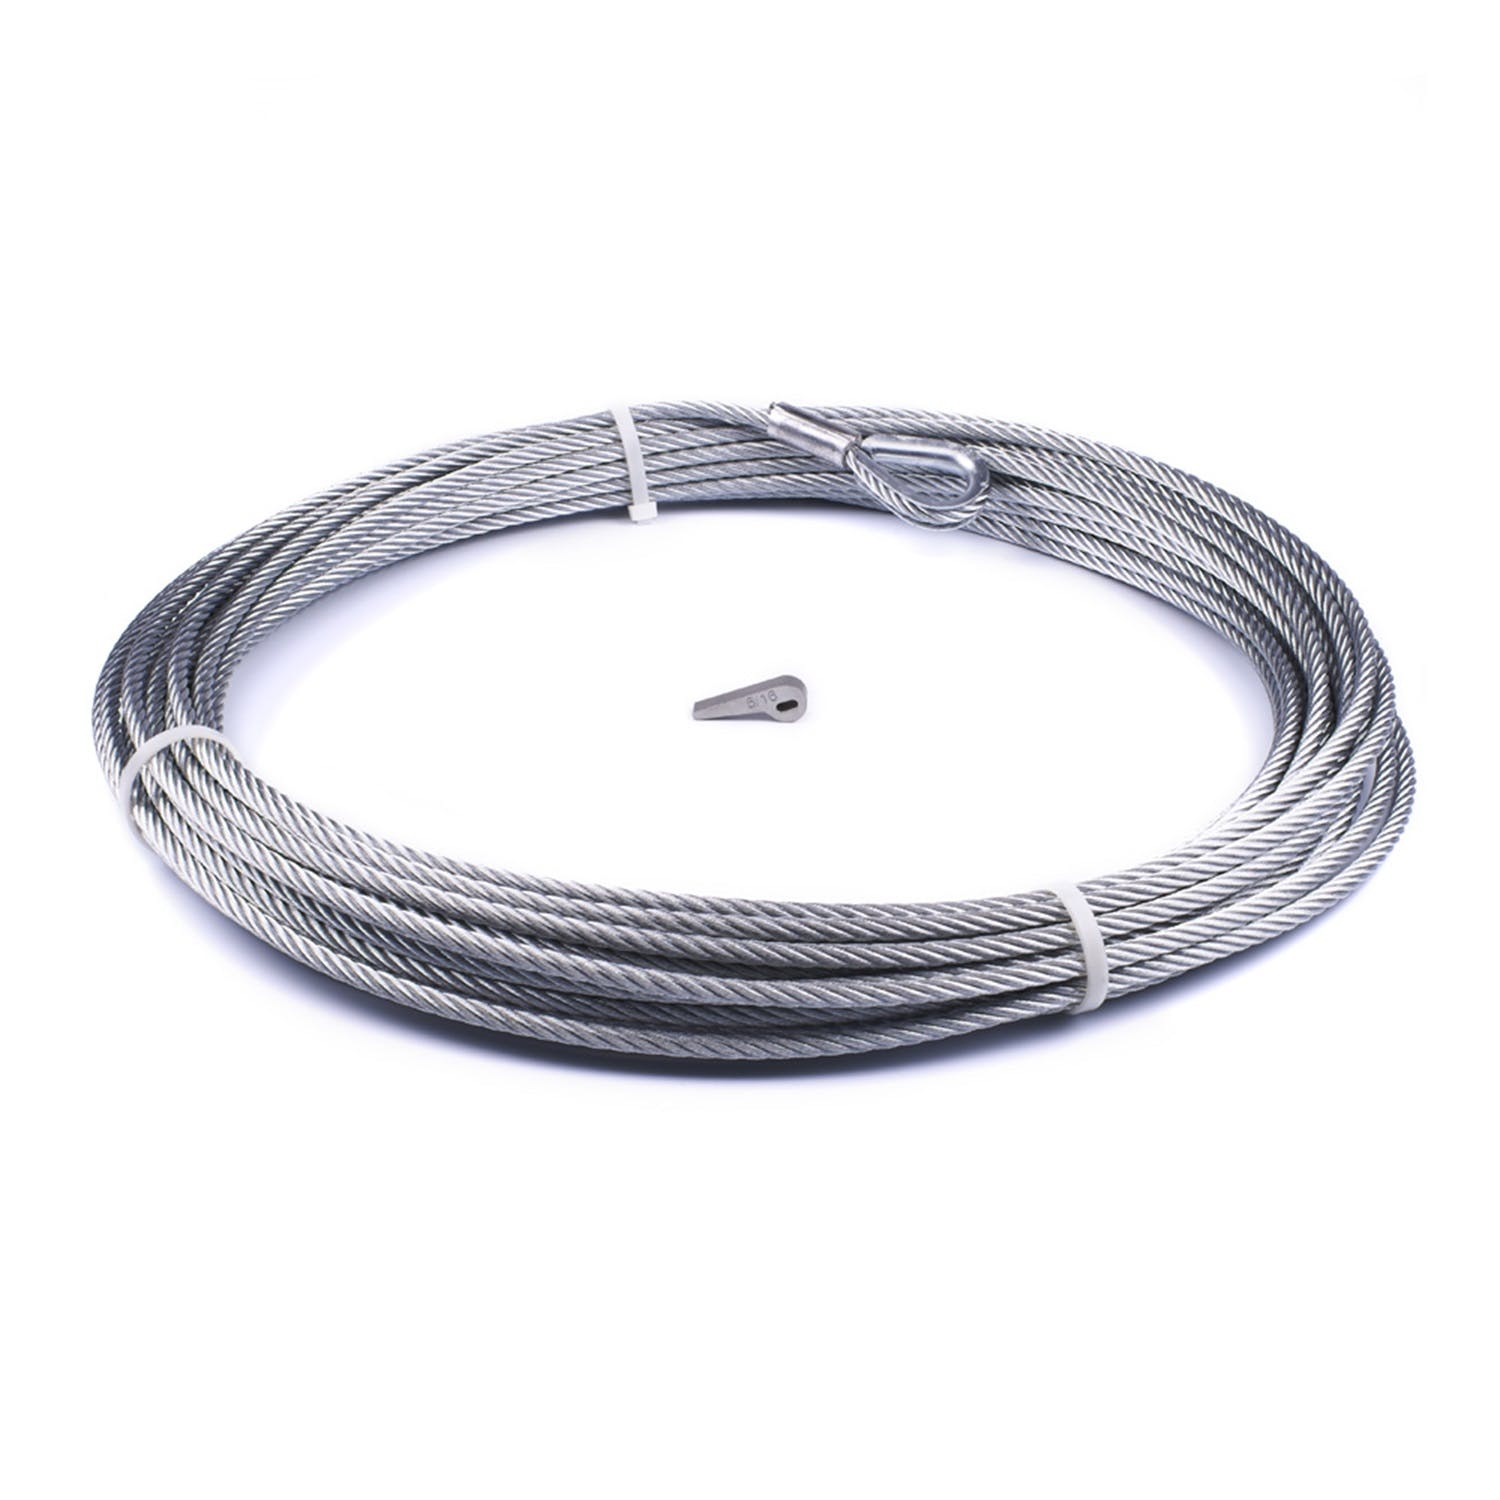 WARN 89212 Wire Rope